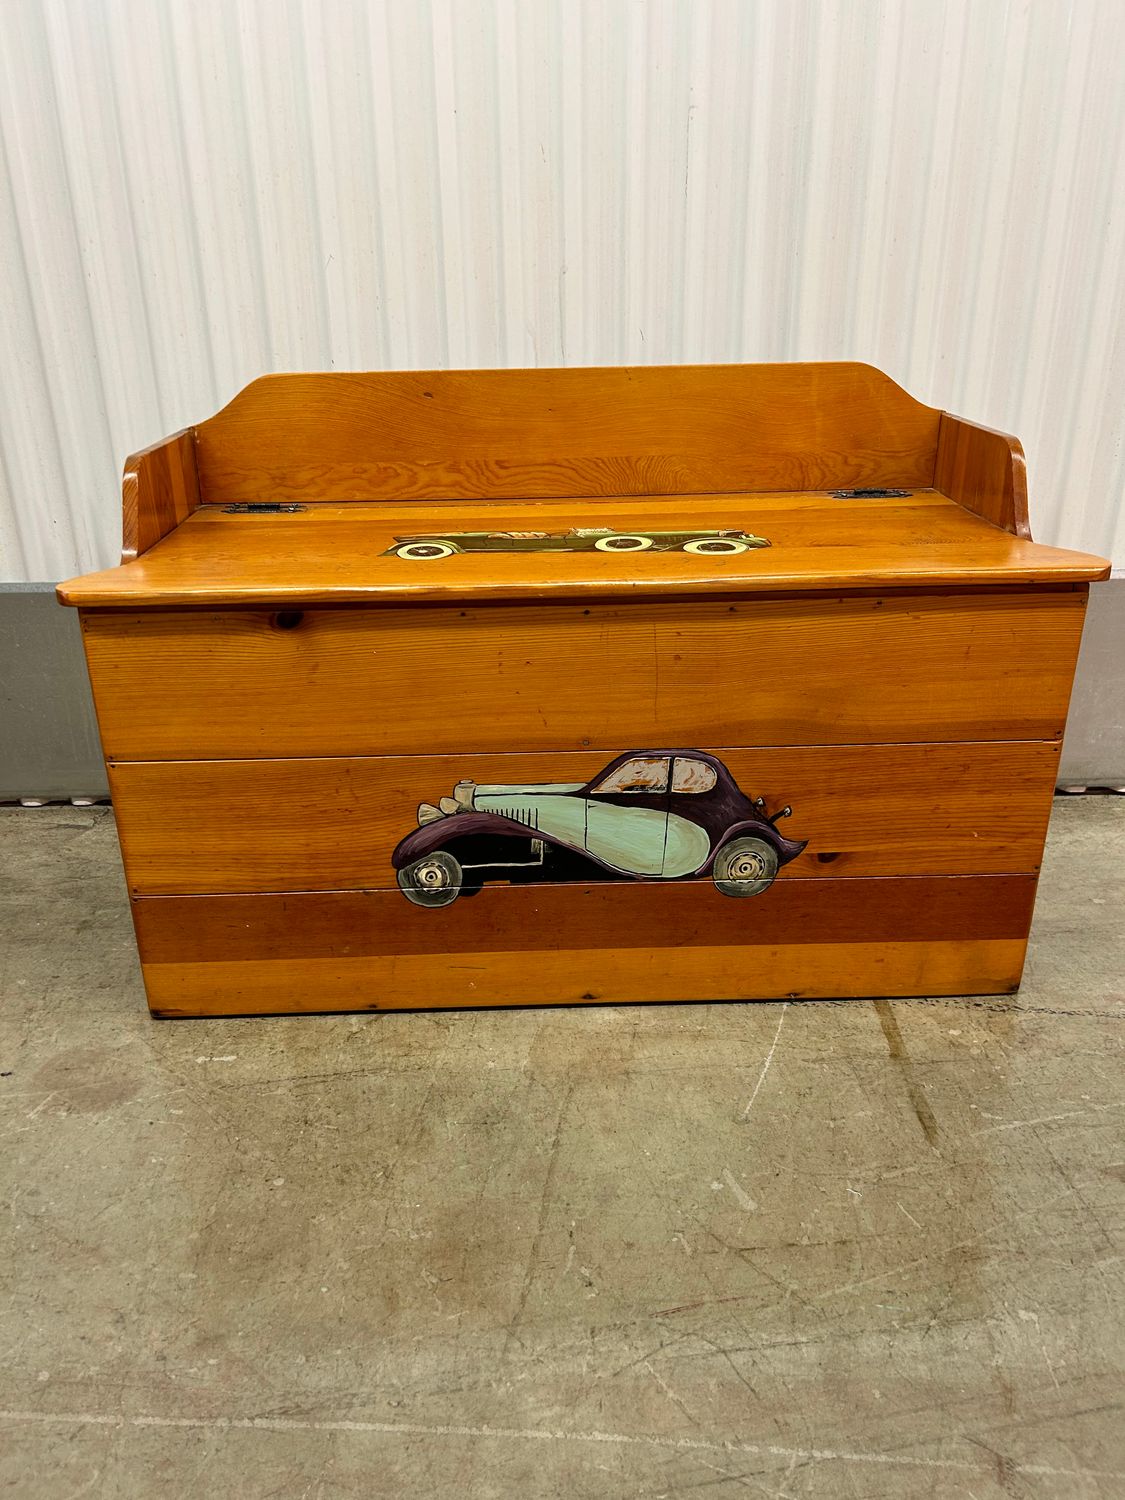 Wood Toy Box / bench with vintage cars #2124